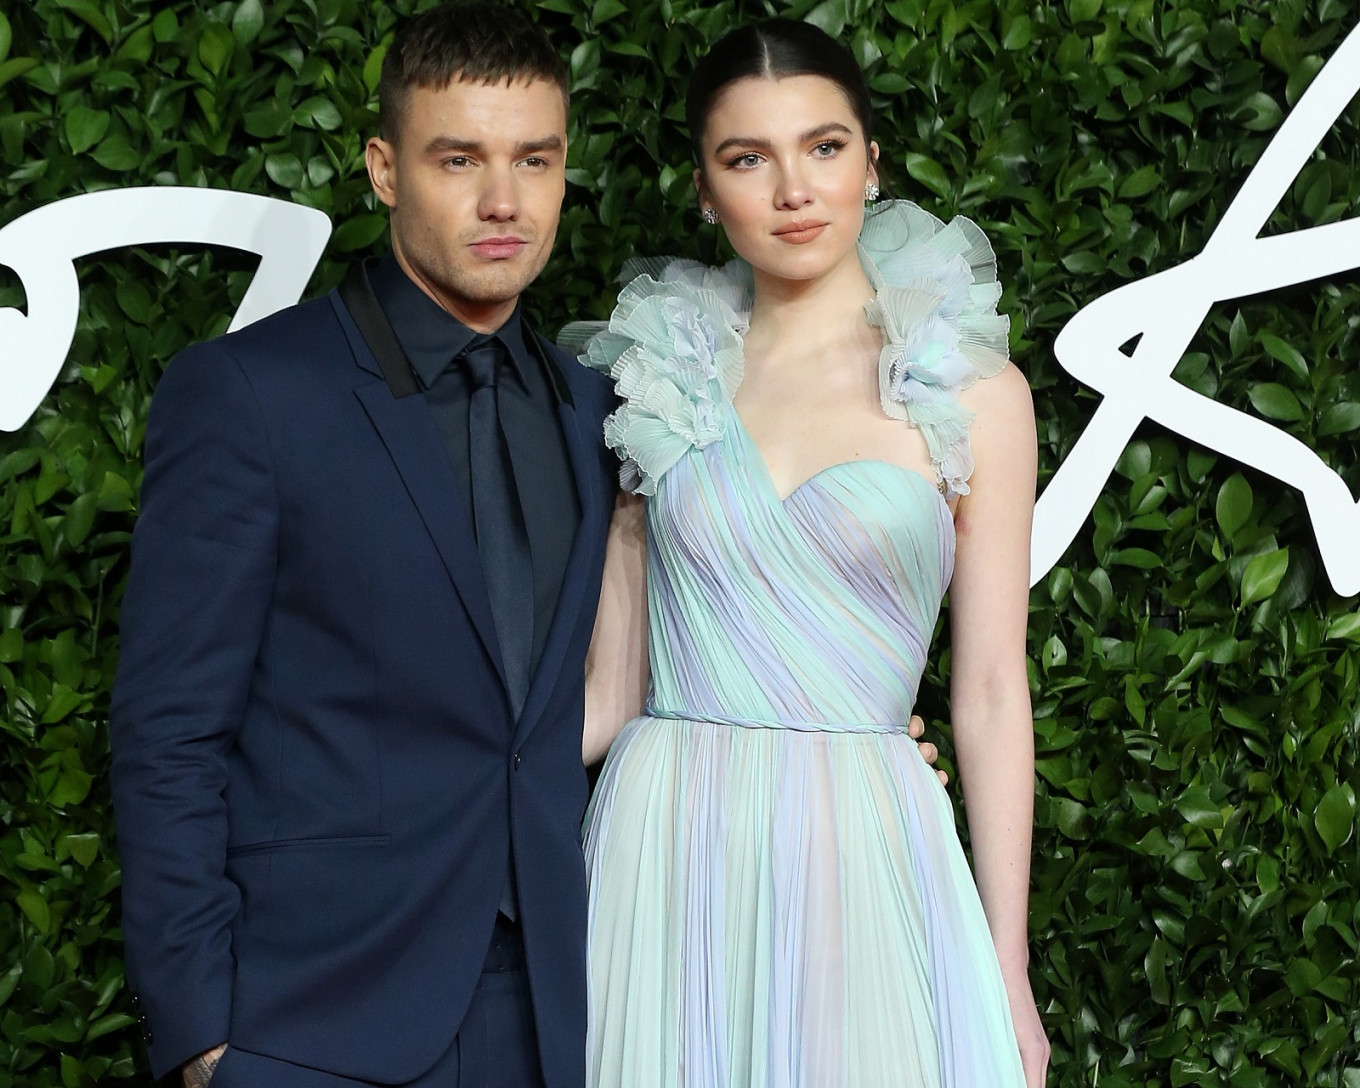 Is Liam Payne engaged?